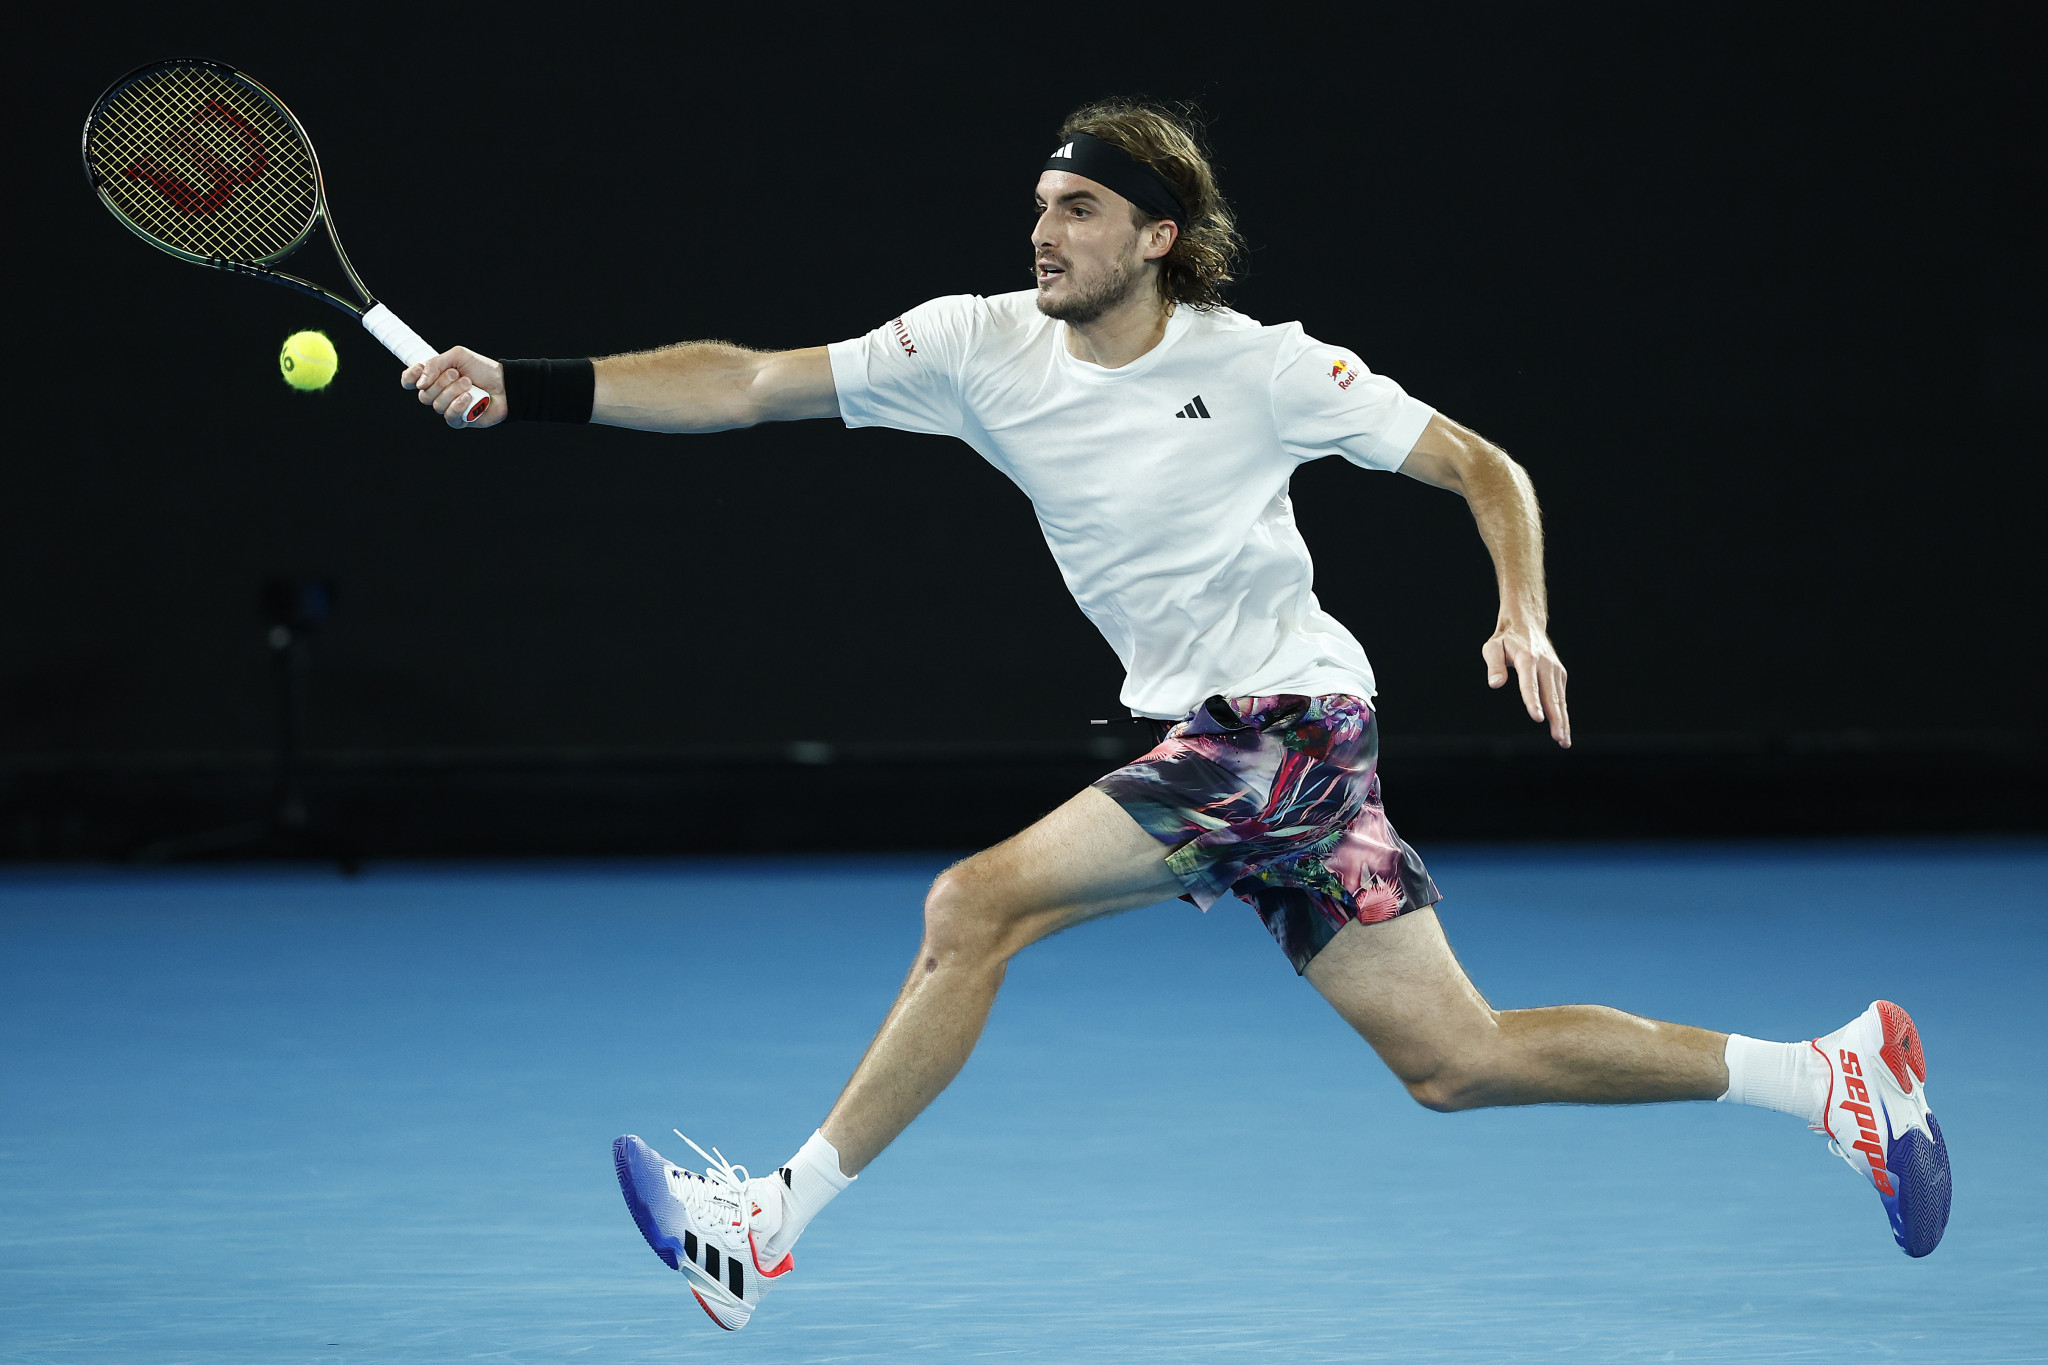 Stefanos Tsitsipas of Greece dropped just five games during his win under the lights on Rod Laver Arena ©Getty Images